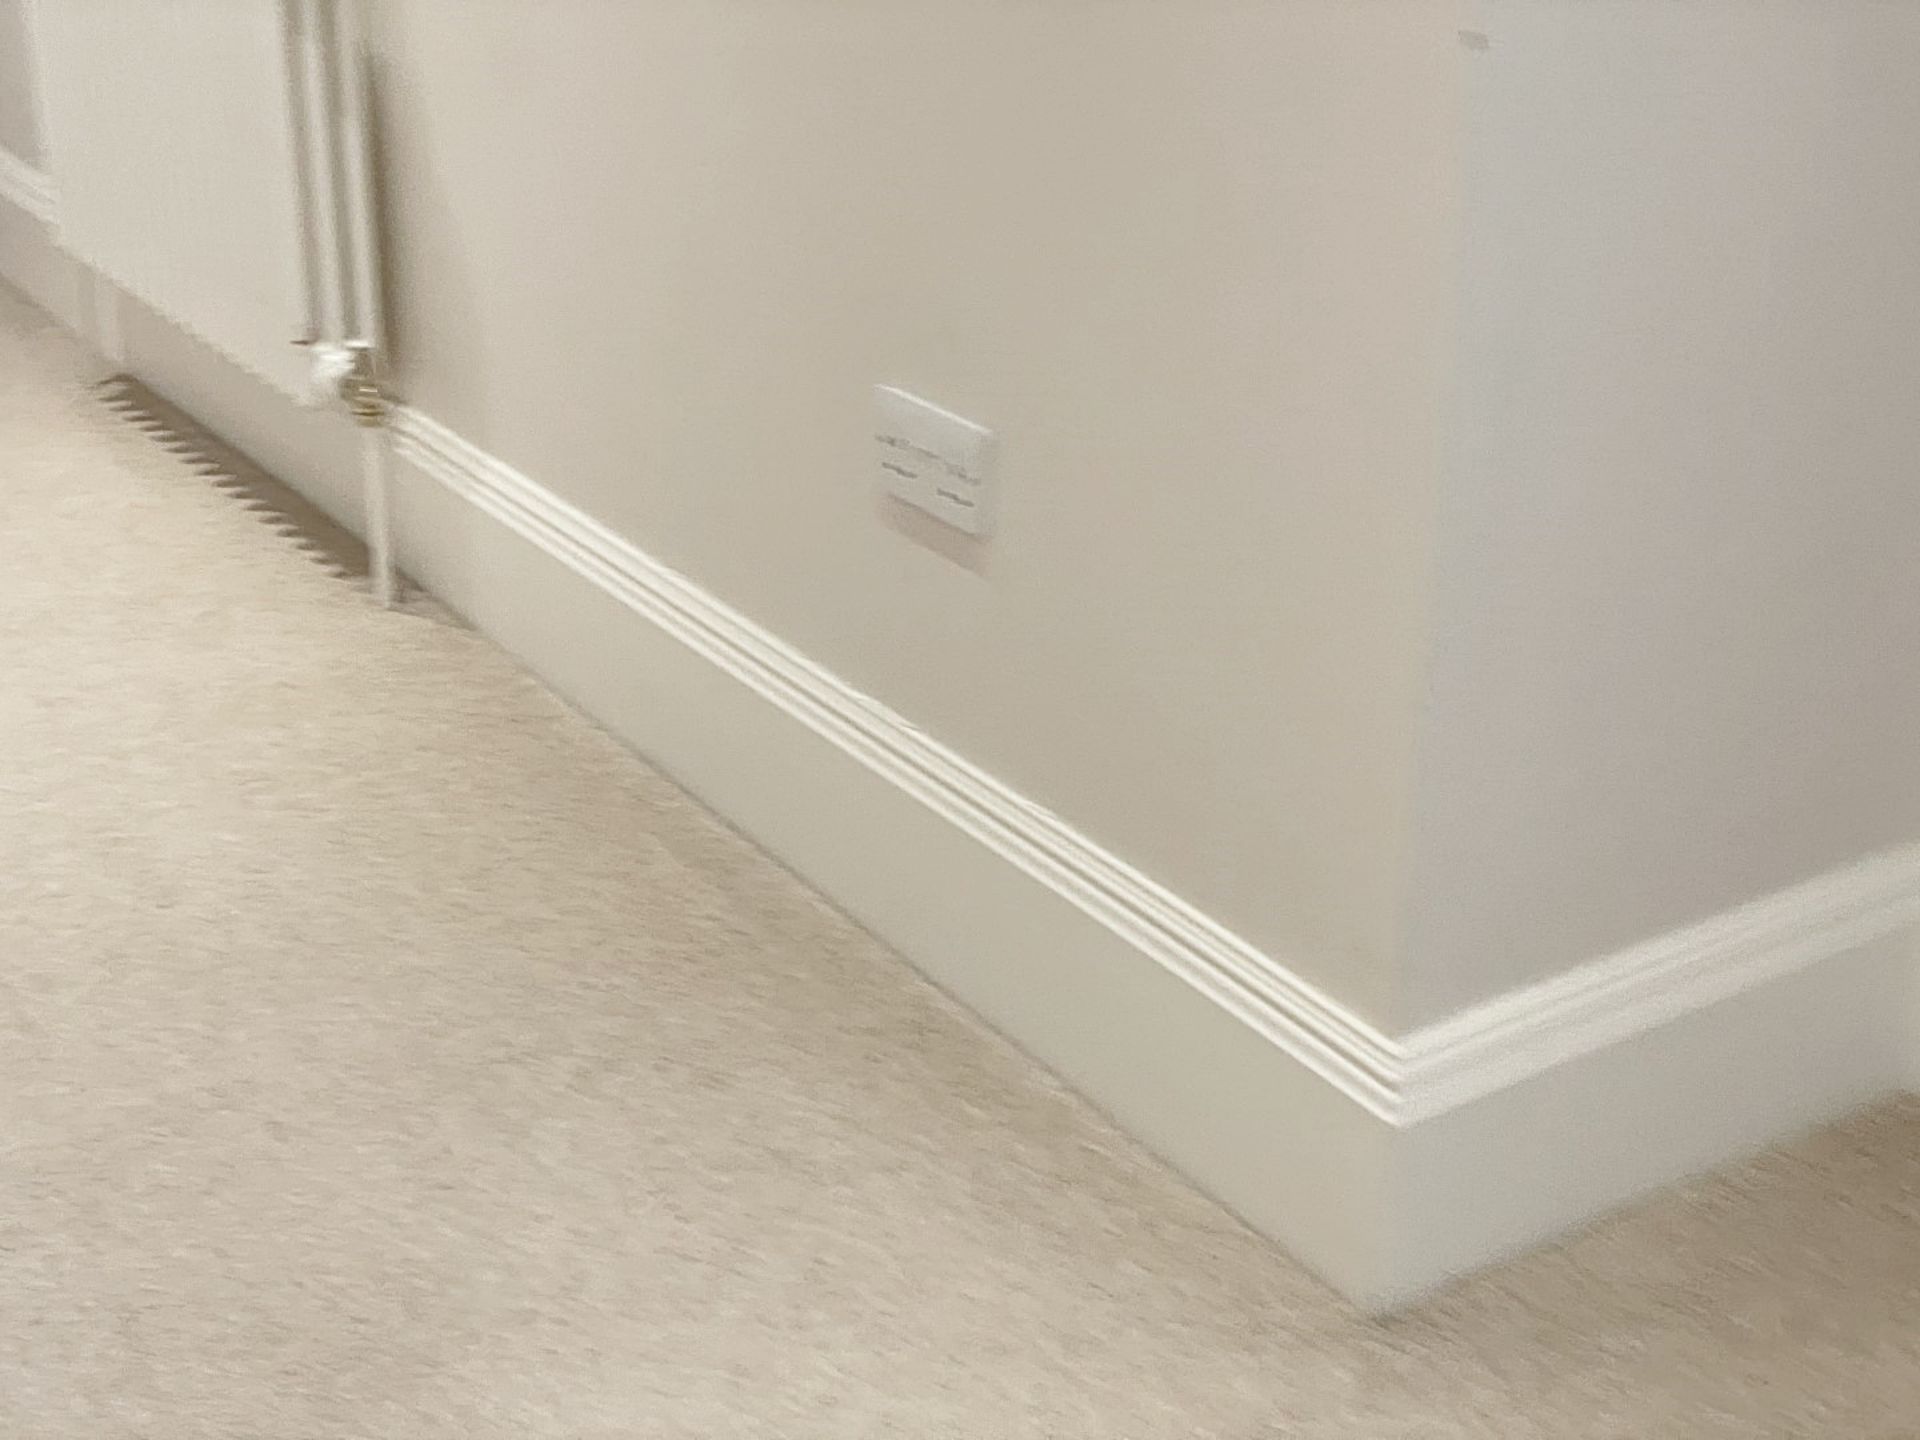 Approximately 16-Metres of Painted Timber Wooden Skirting Boards, In White - Ref: PAN283 / Bed4 - - Image 3 of 6